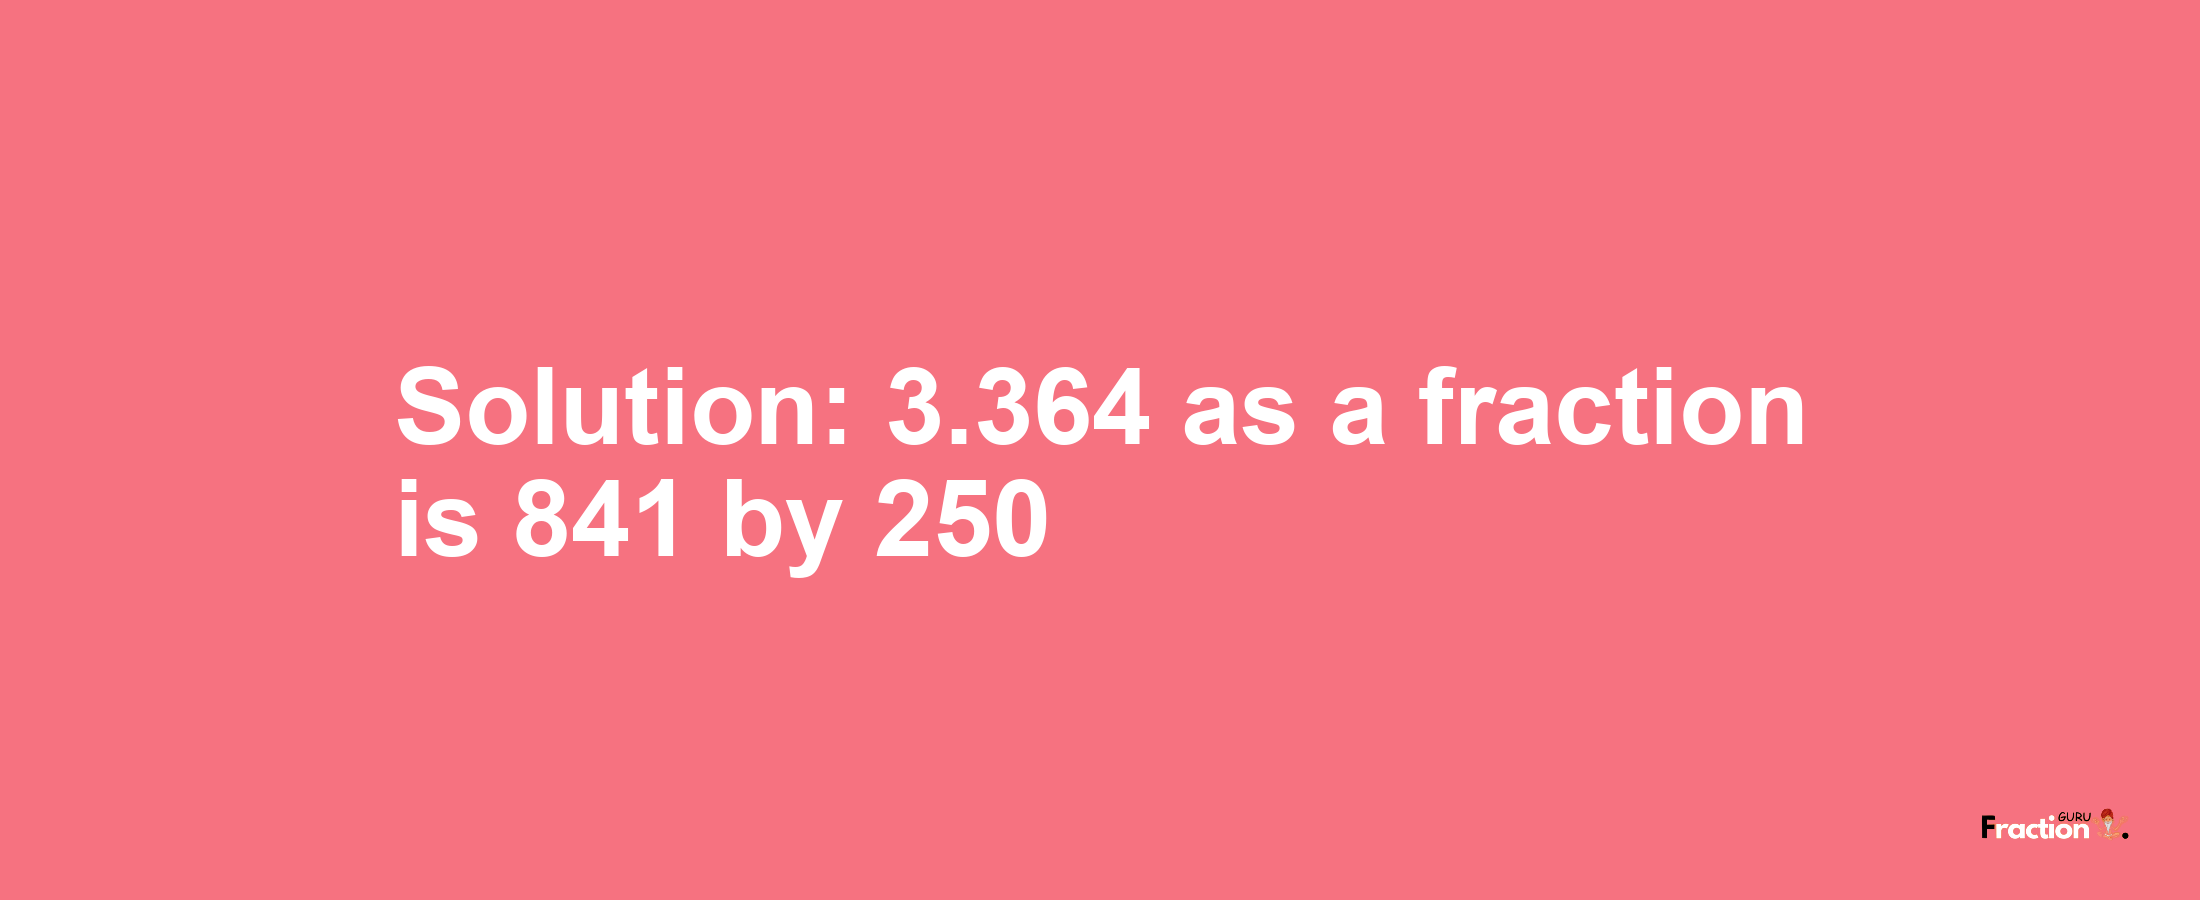 Solution:3.364 as a fraction is 841/250